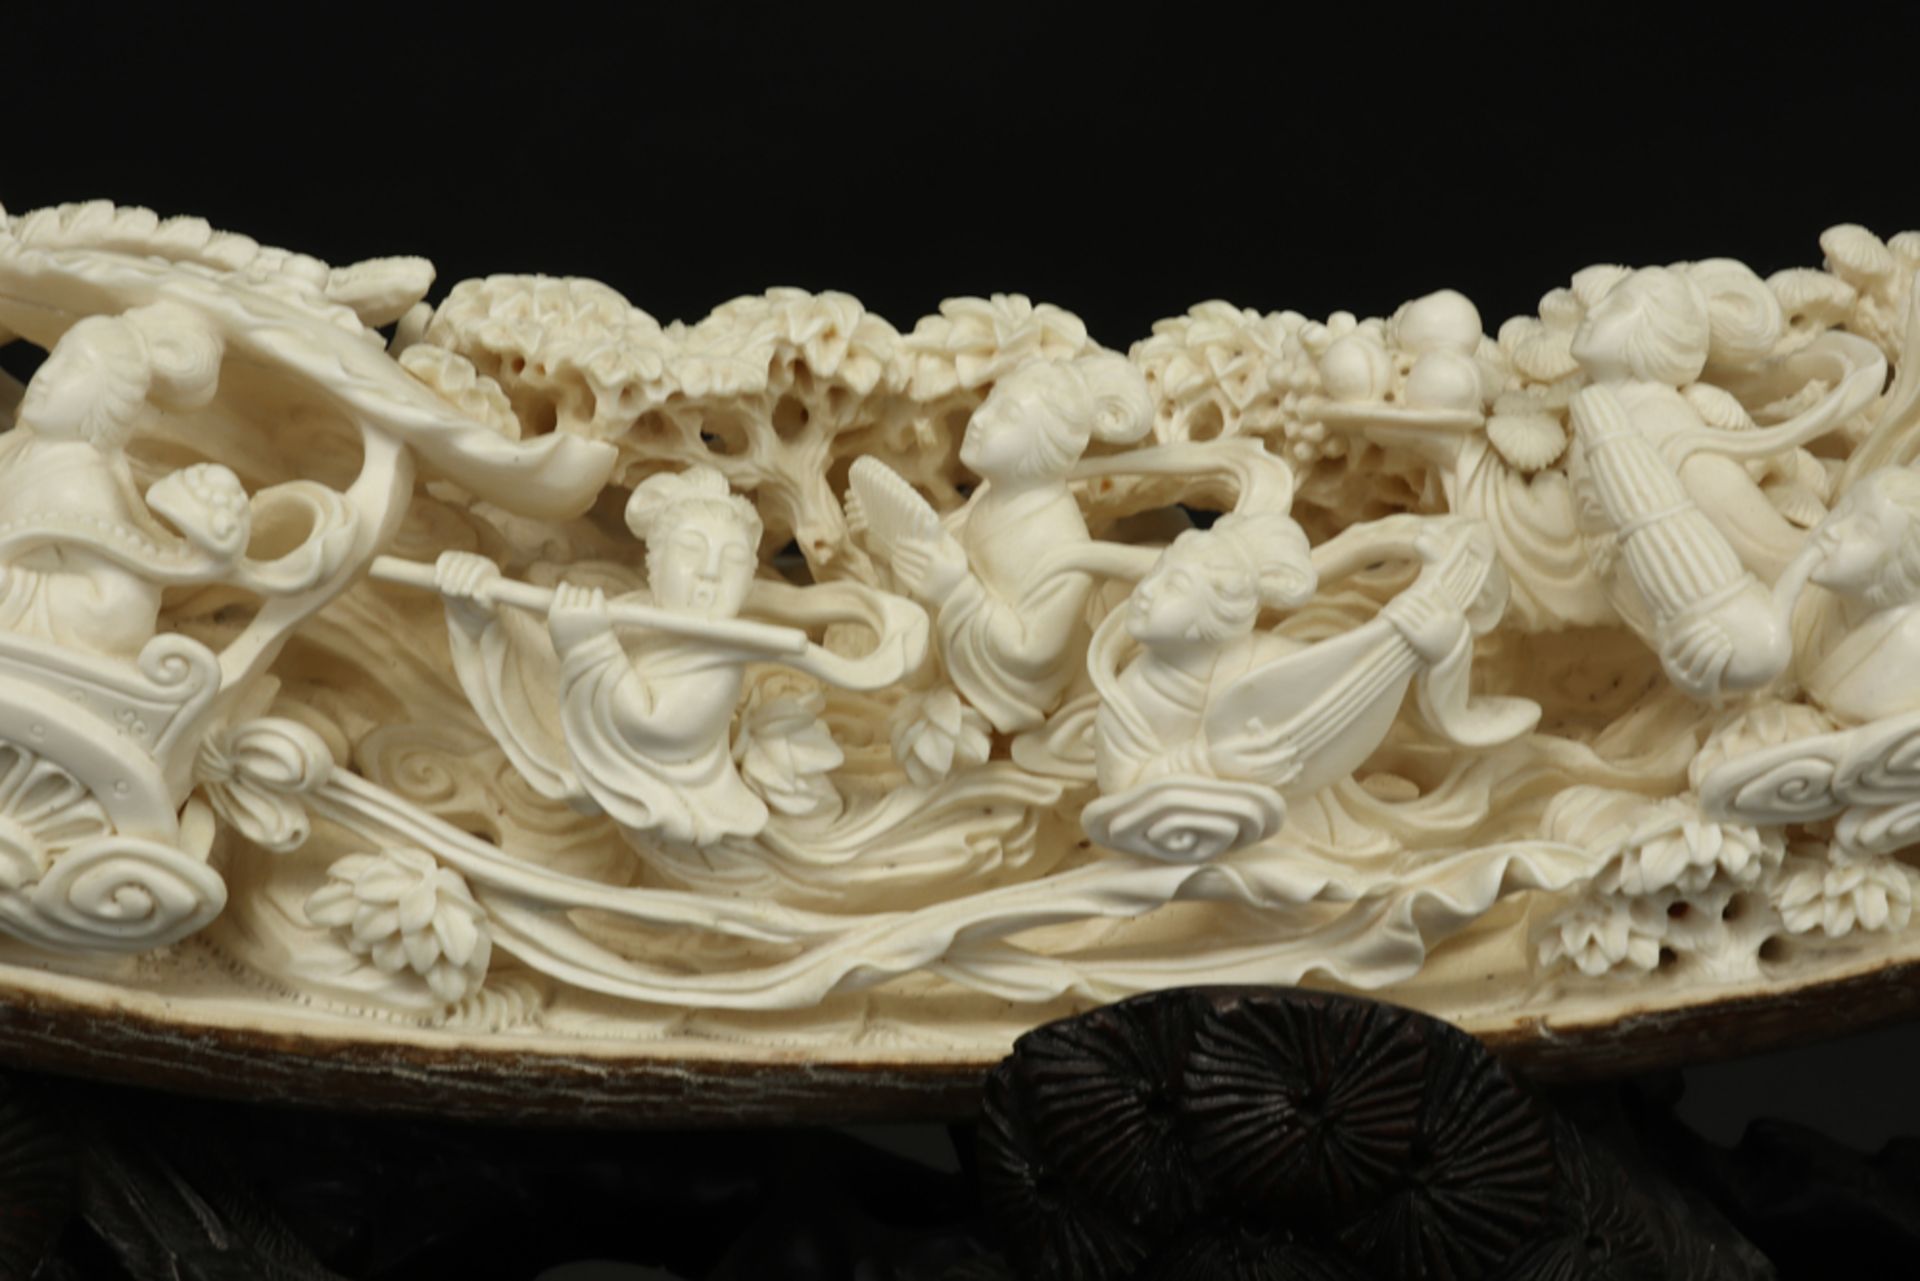 mammoth tusk with a fine Chinese sculpture on its wooden stand ||Chinese fijngebeeldhouwde sculptuur - Image 6 of 9